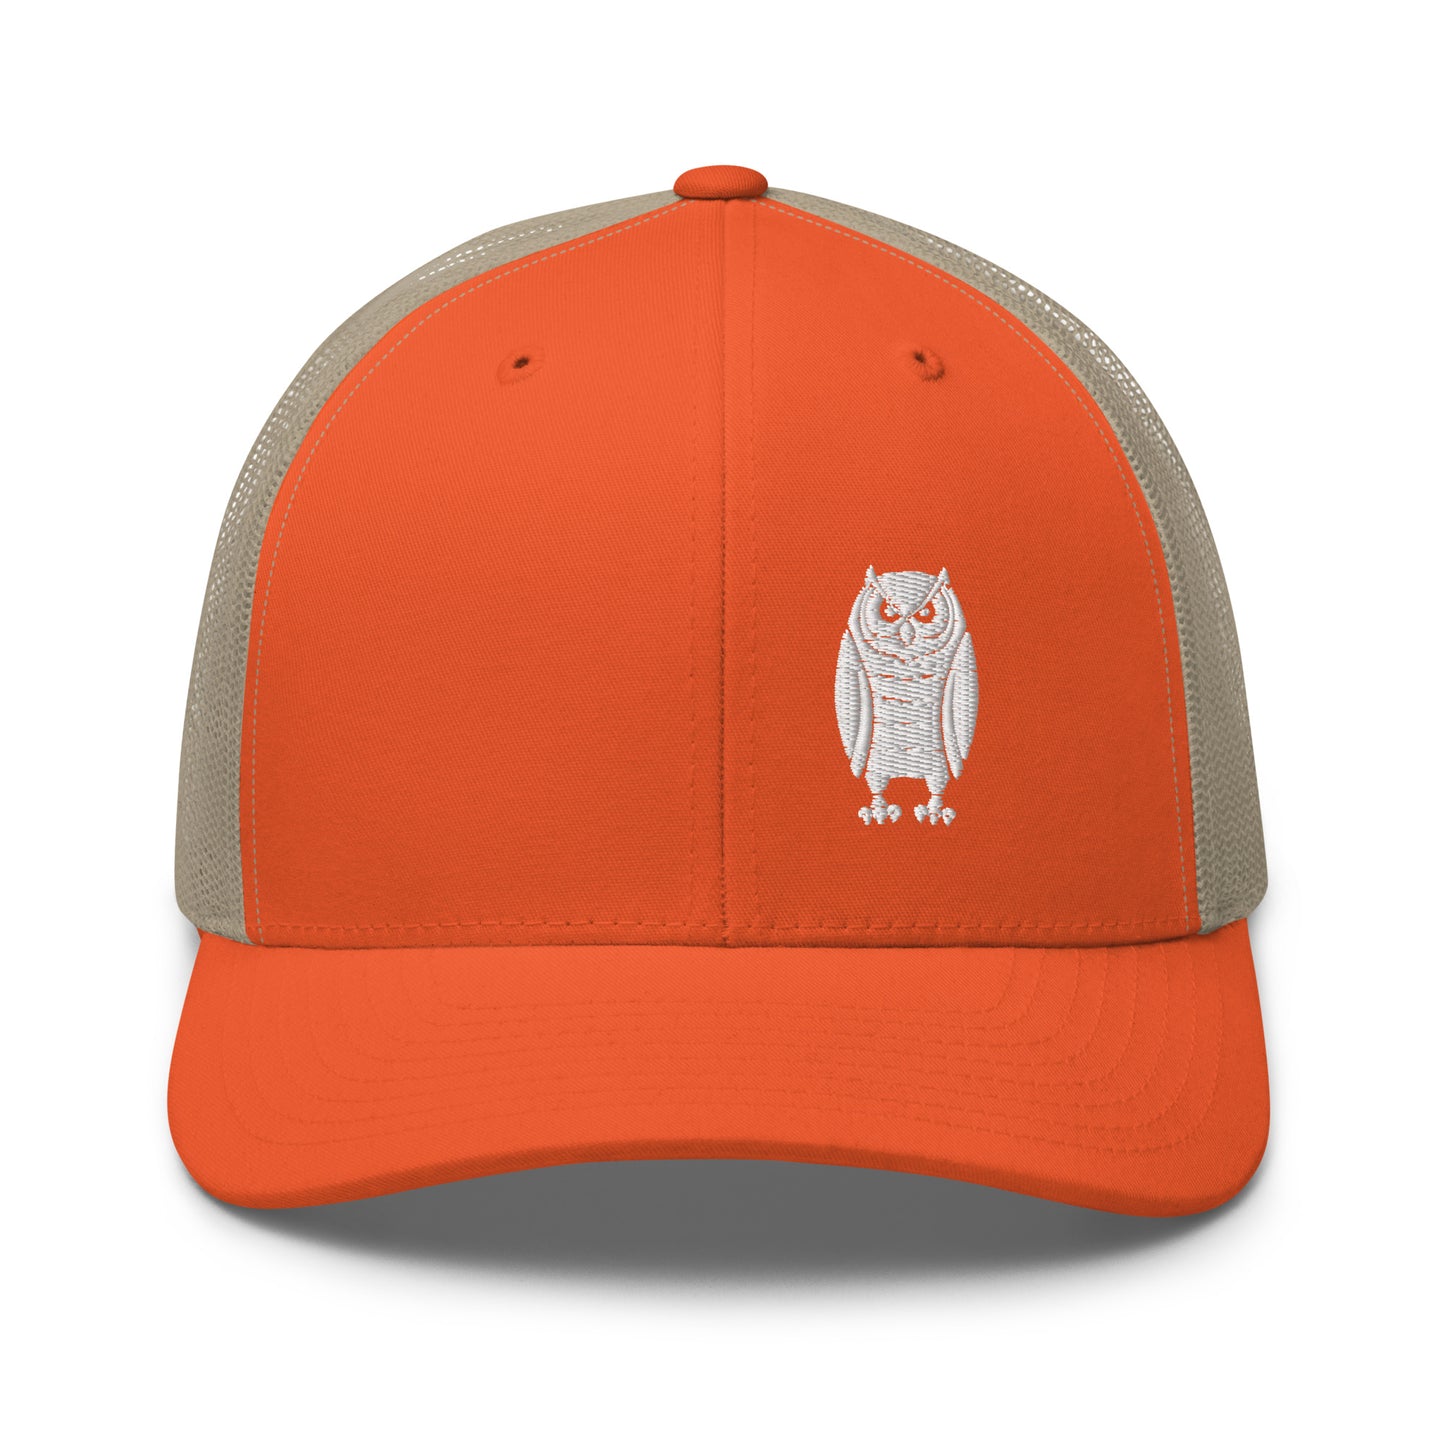 Owl Trucker Hat.  A Yupoon 6606 orange and beige hat with an Owl embroidered on it.